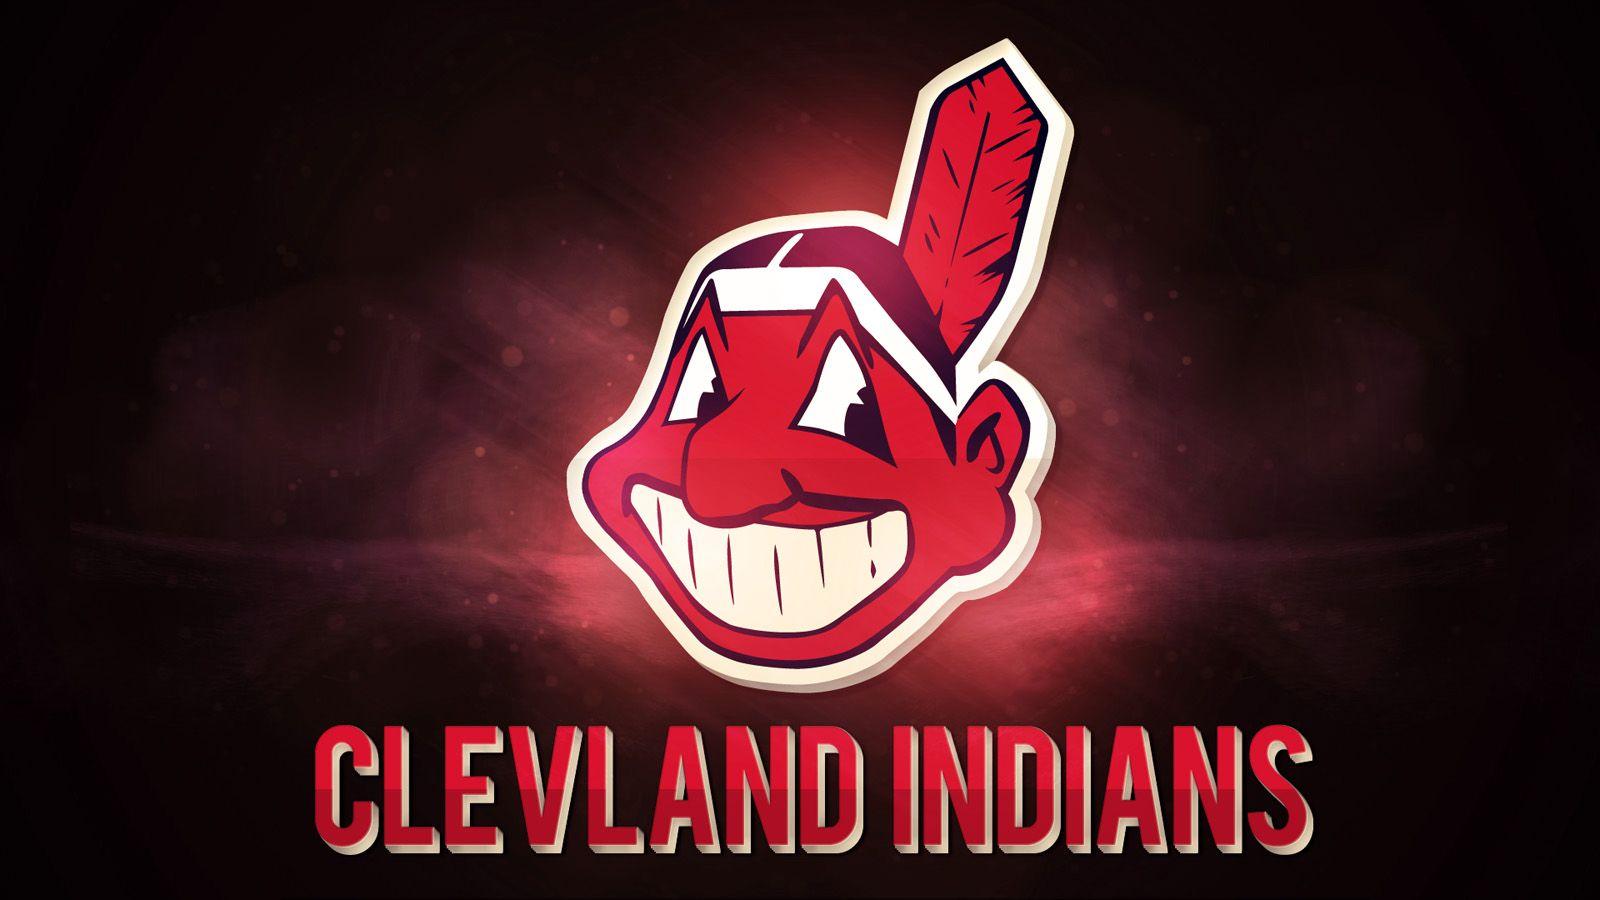 Cleveland Indians Wallpapers - Top Free